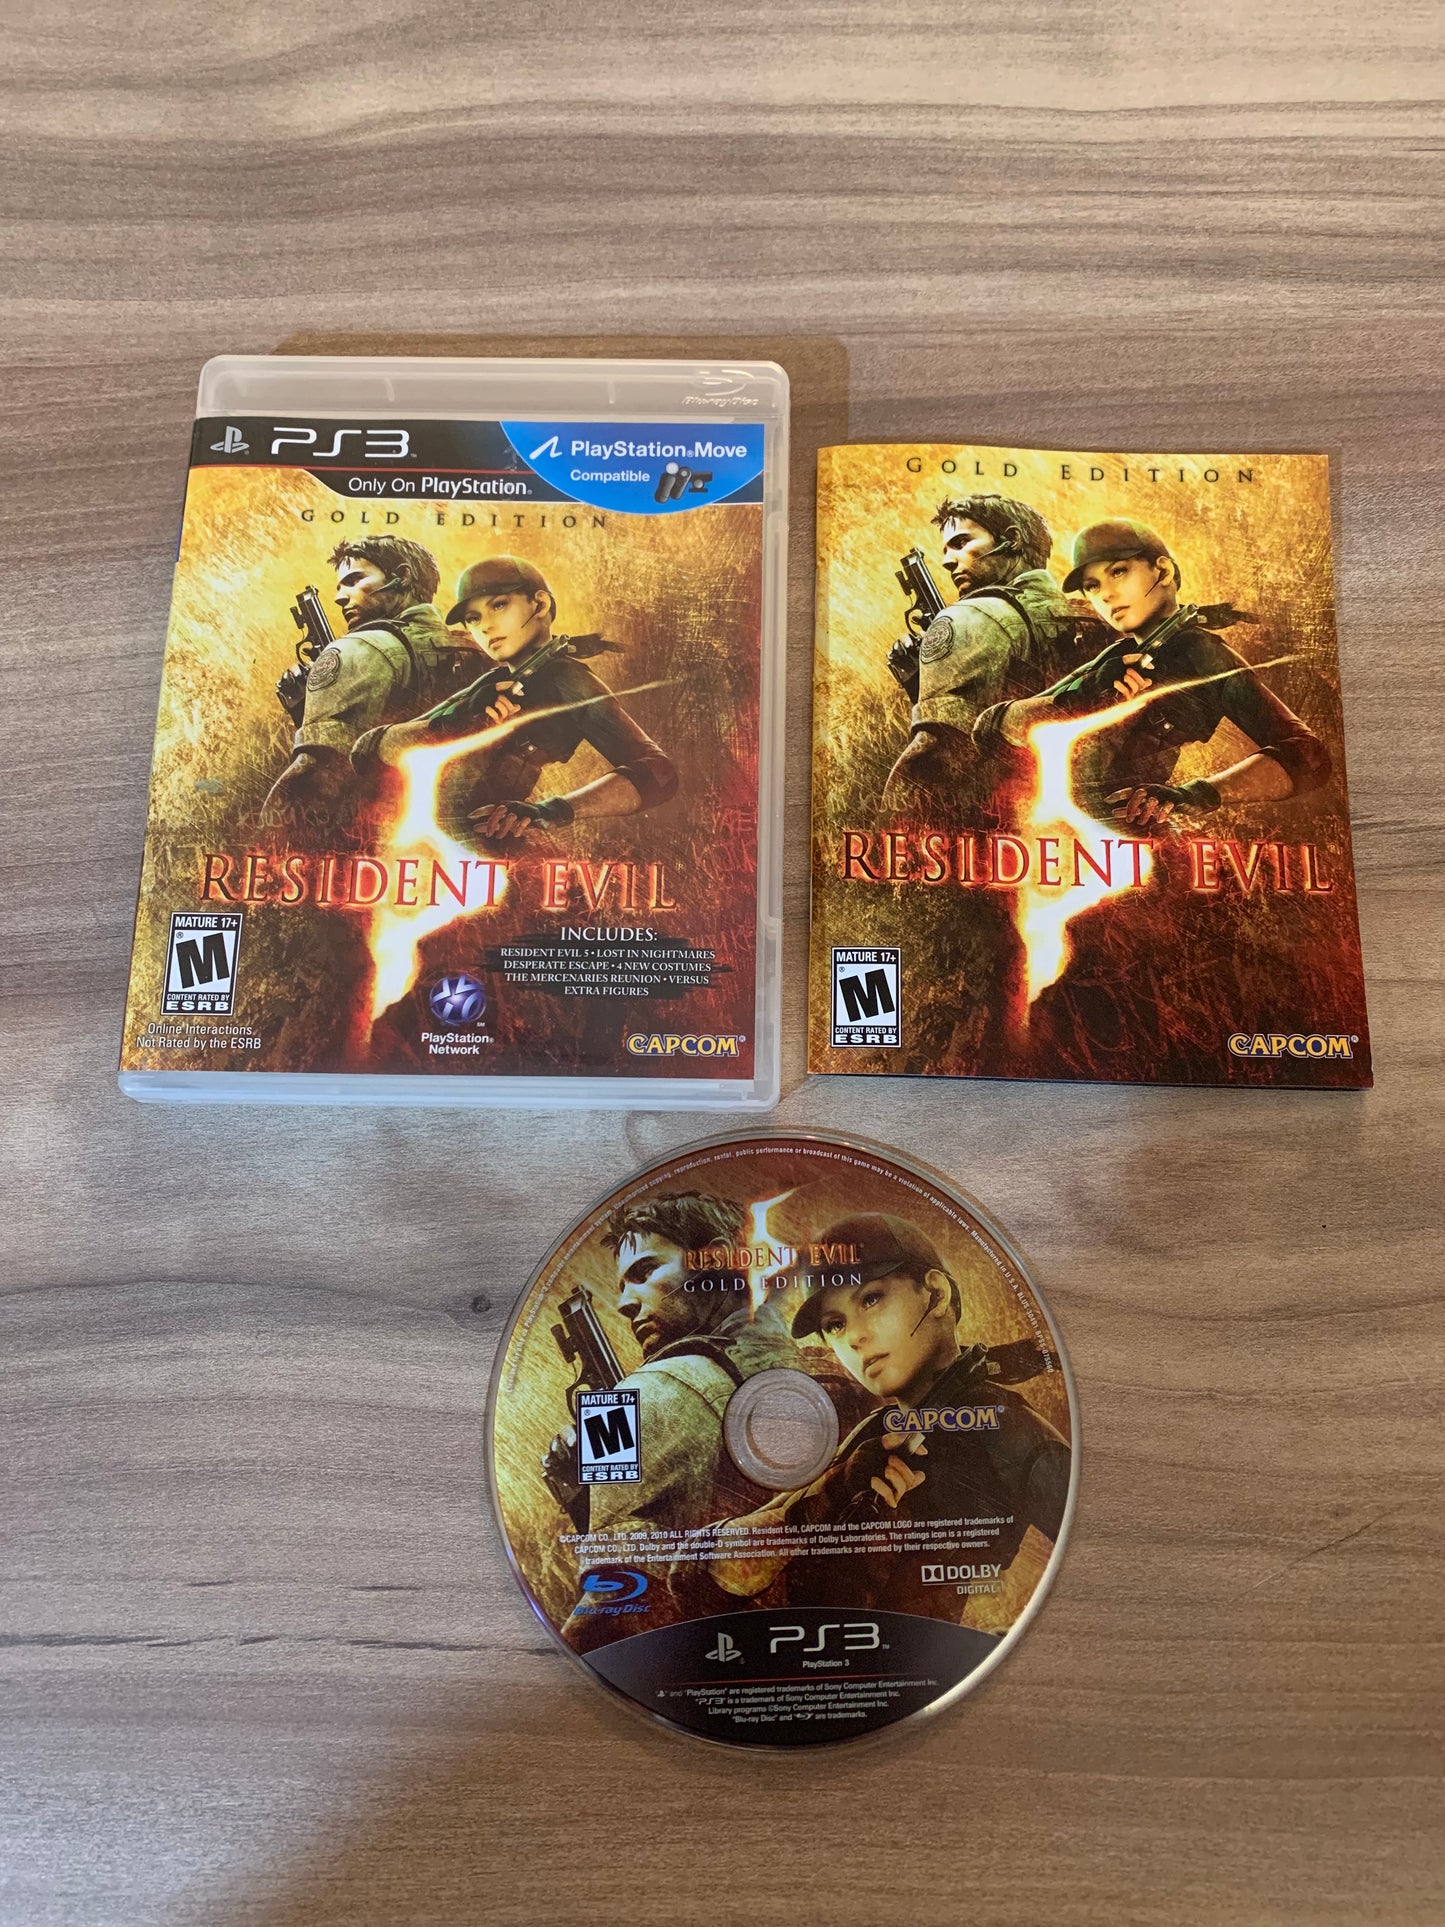 PiXEL-RETRO.COM : SONY PLAYSTATION 3 (PS3) COMPLET CIB BOX MANUAL GAME NTSC RESIDENT EVIL 5 GOLD EDITION